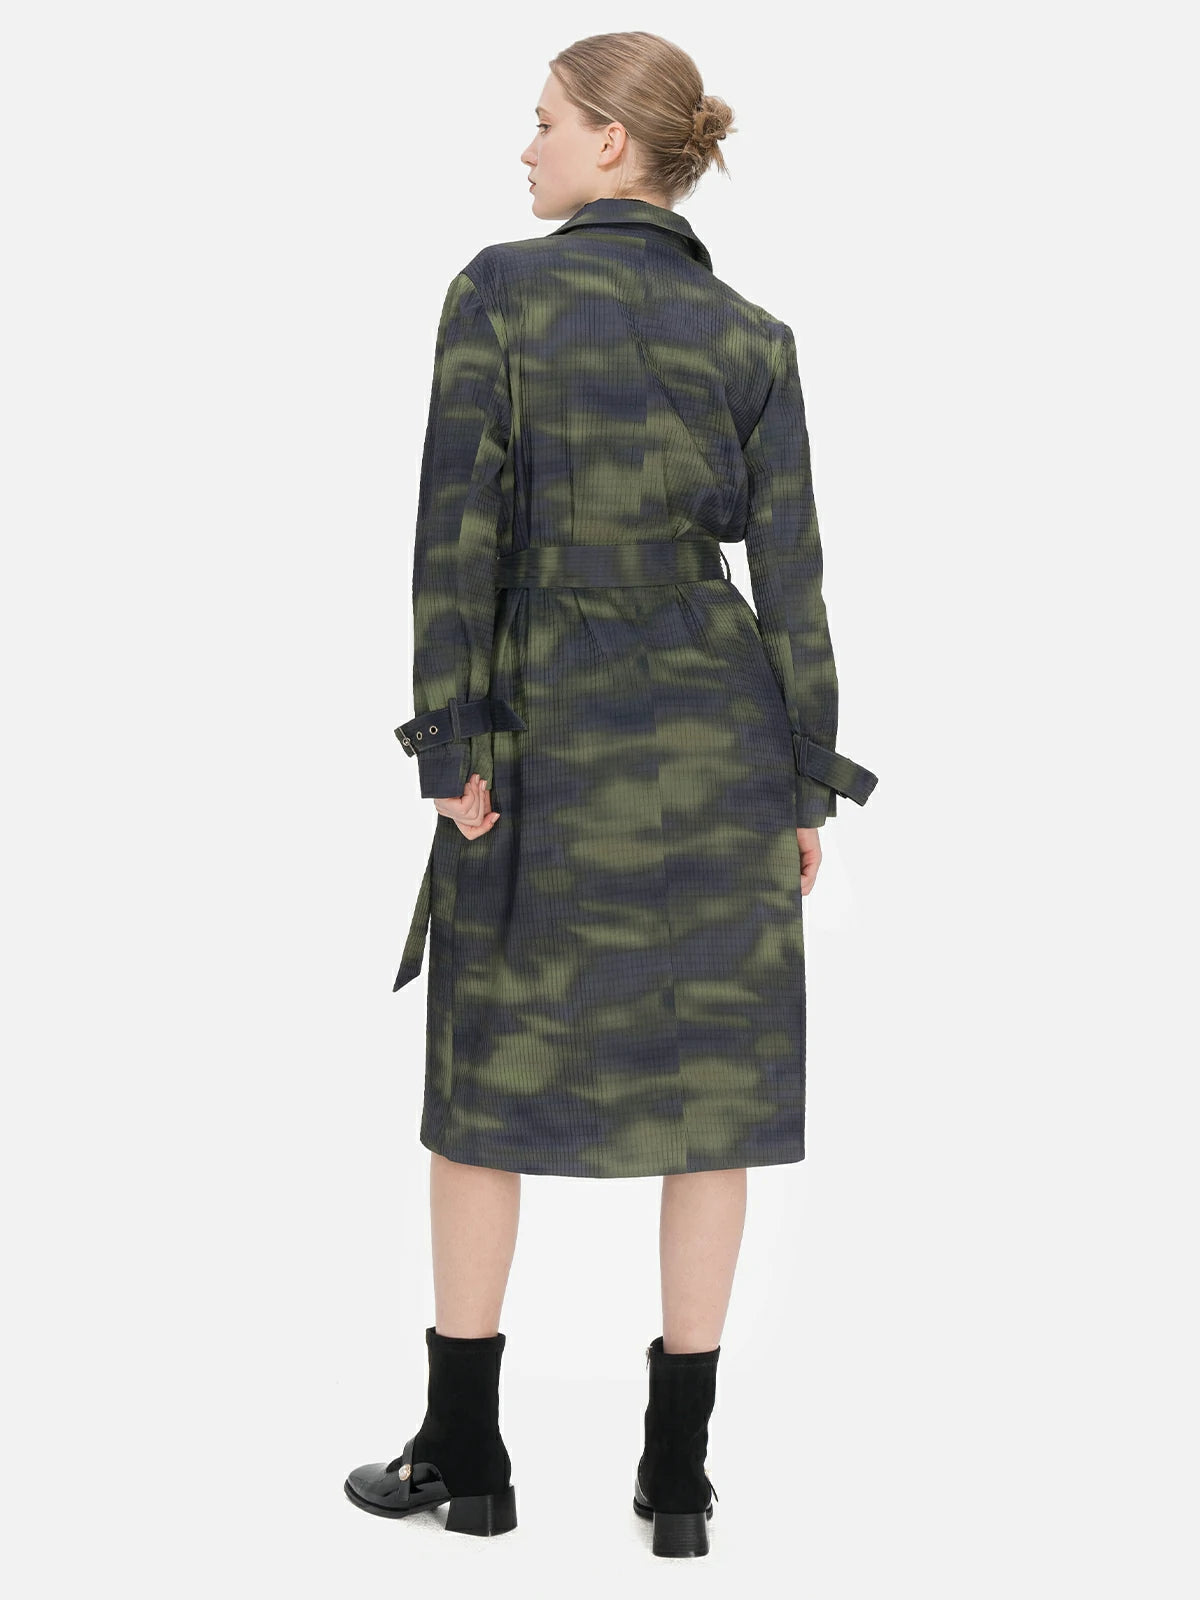 Define your style with this trench coat, featuring gray and green tones and irregular prints, delivering a comfortable fit and an artful atmosphere.